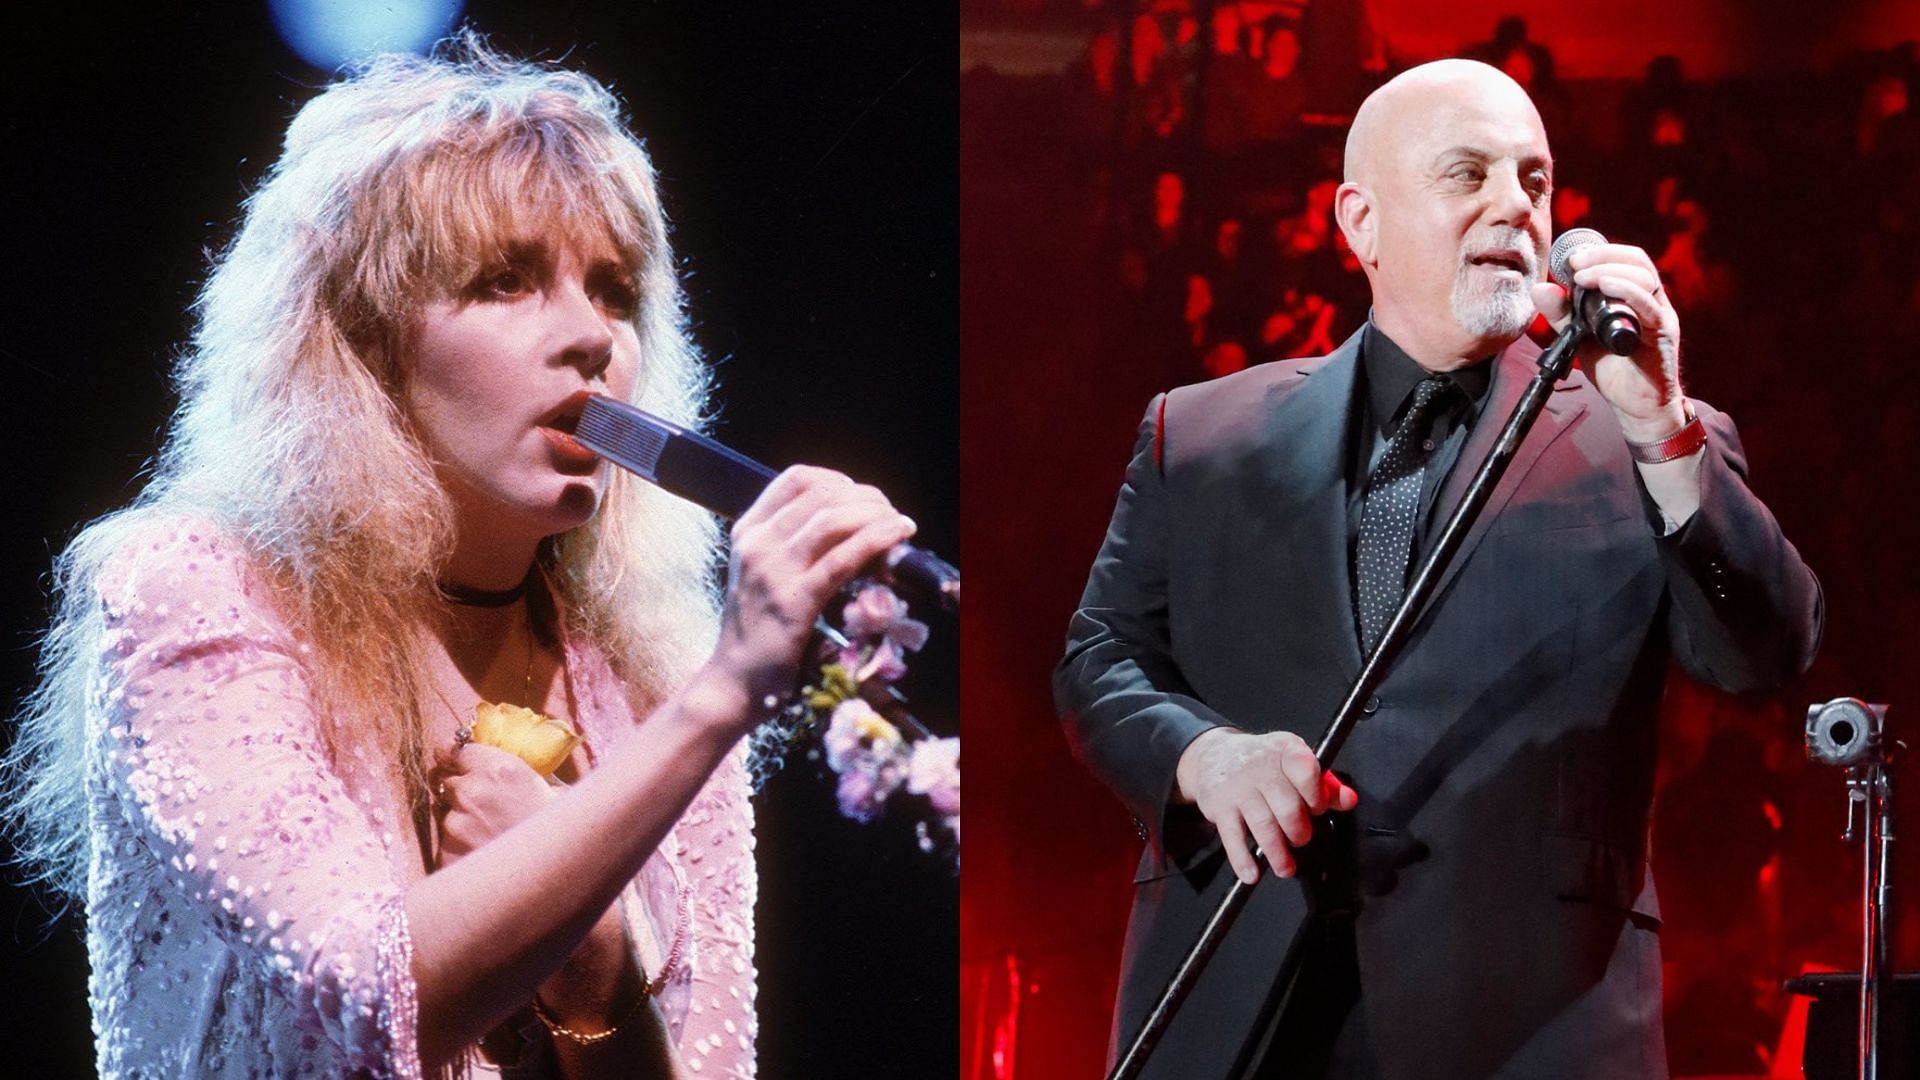 Stevie Nicks and Billy Joel concert 2023 Tickets, presale, where to